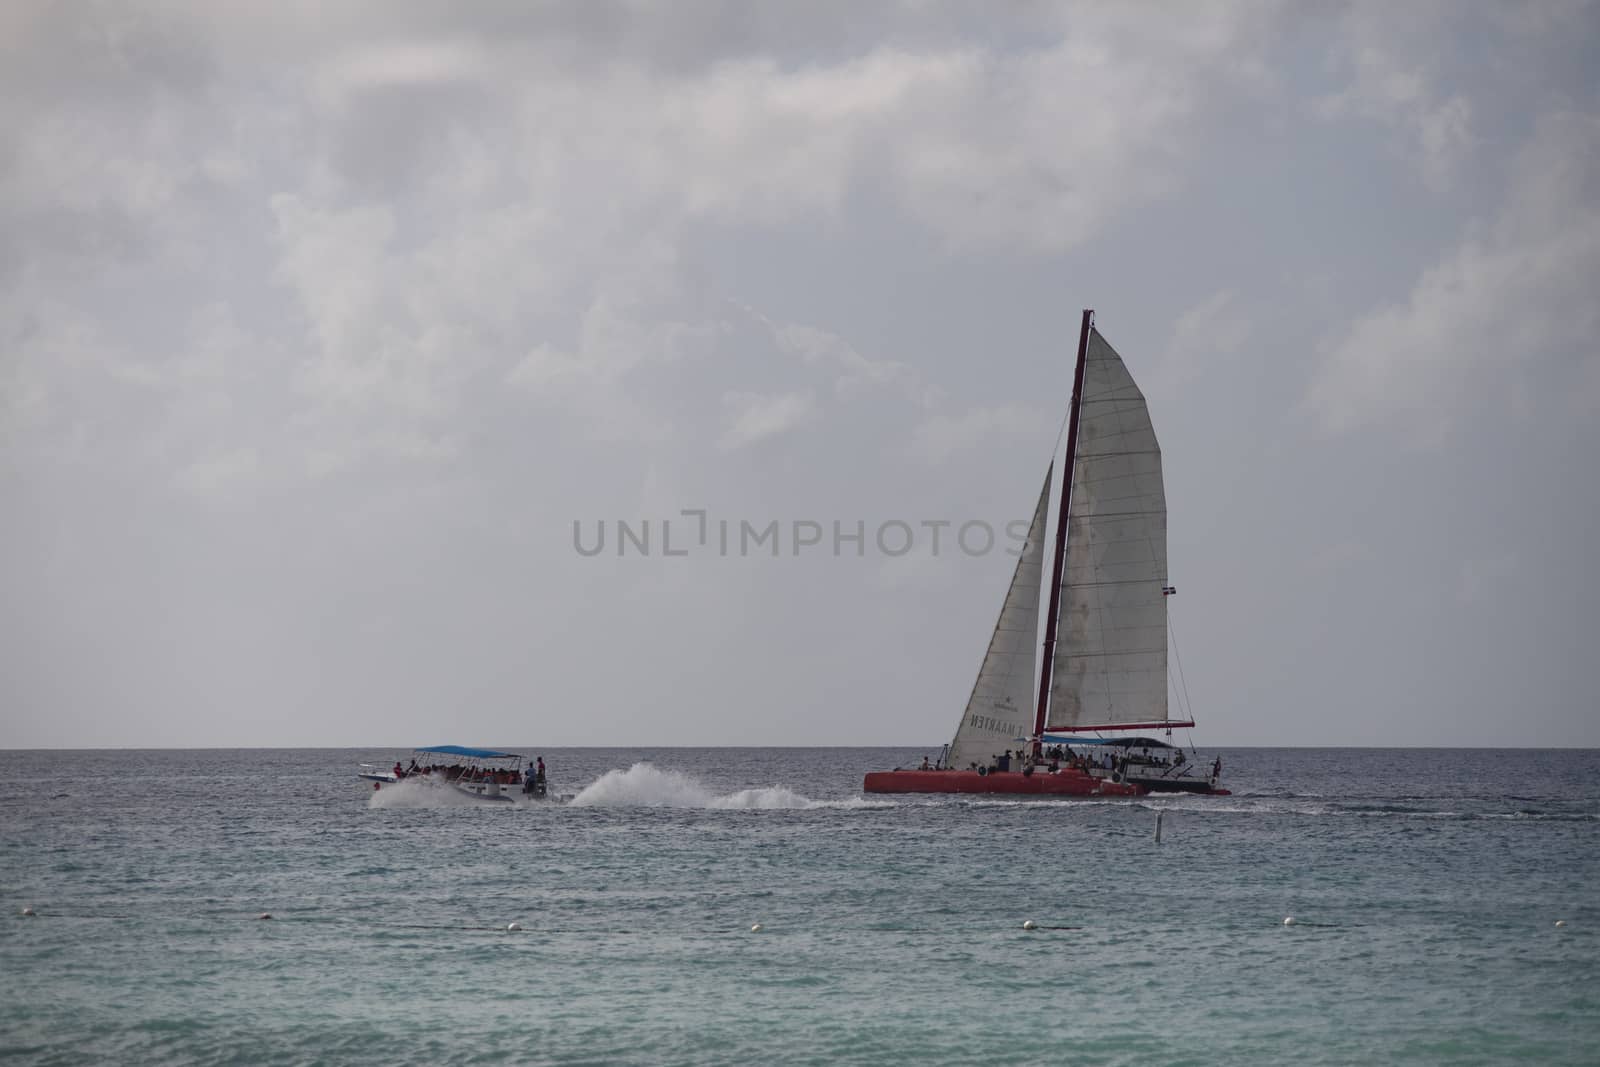 Dominican boats in sea 9 by pippocarlot